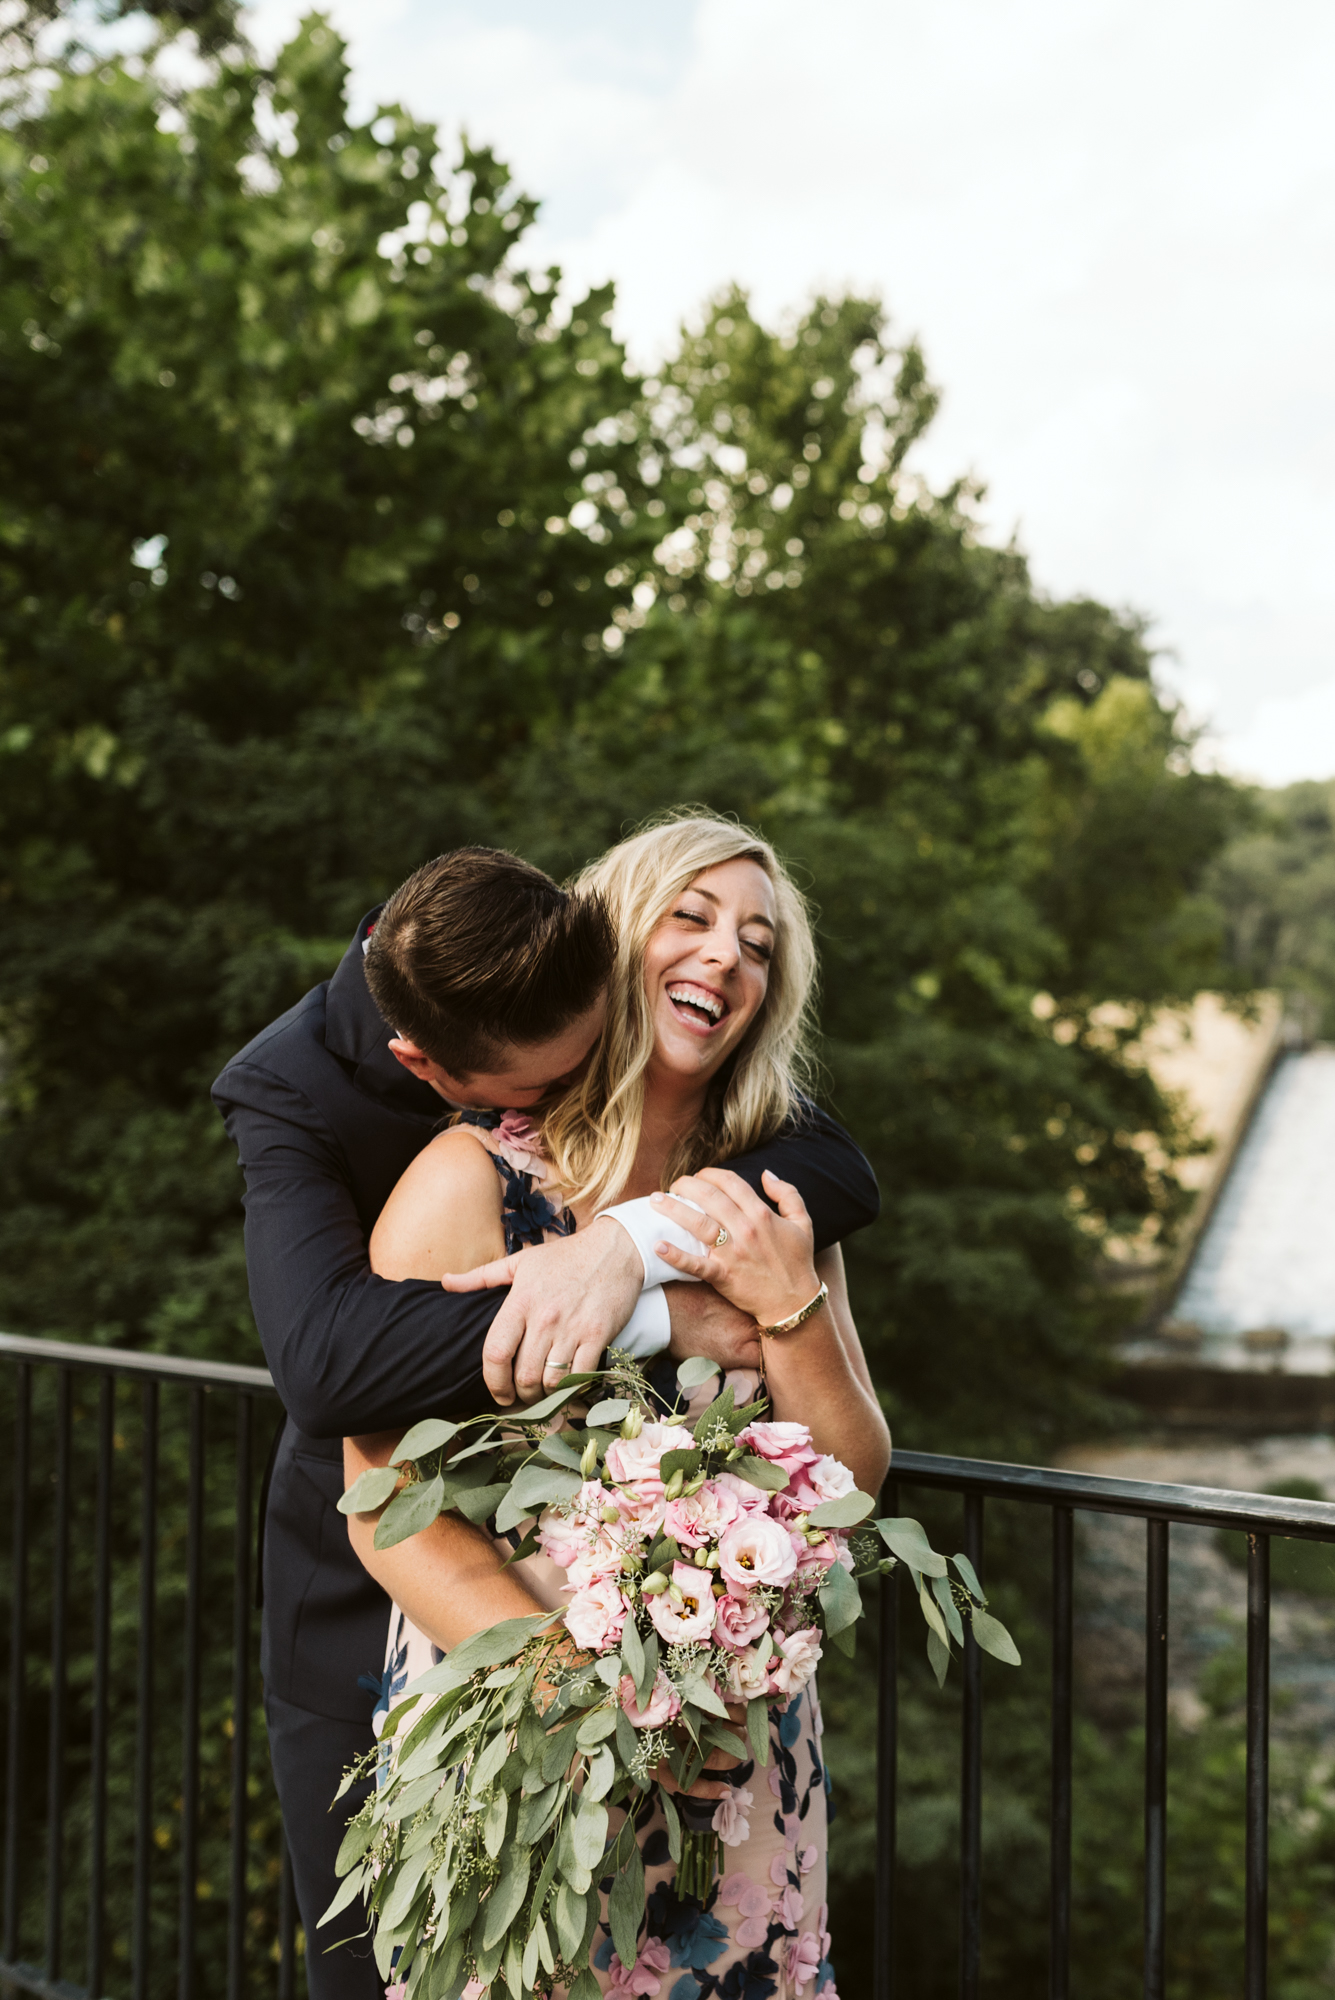 Outdoor Wedding, Casual, Simple, Lake Roland, Baltimore, Maryland Wedding Photographer, Laid Back, DIY Flowers, Bouquet with Eucalyptus and Lisianthus, Bride and Groom Hugging and Laughing